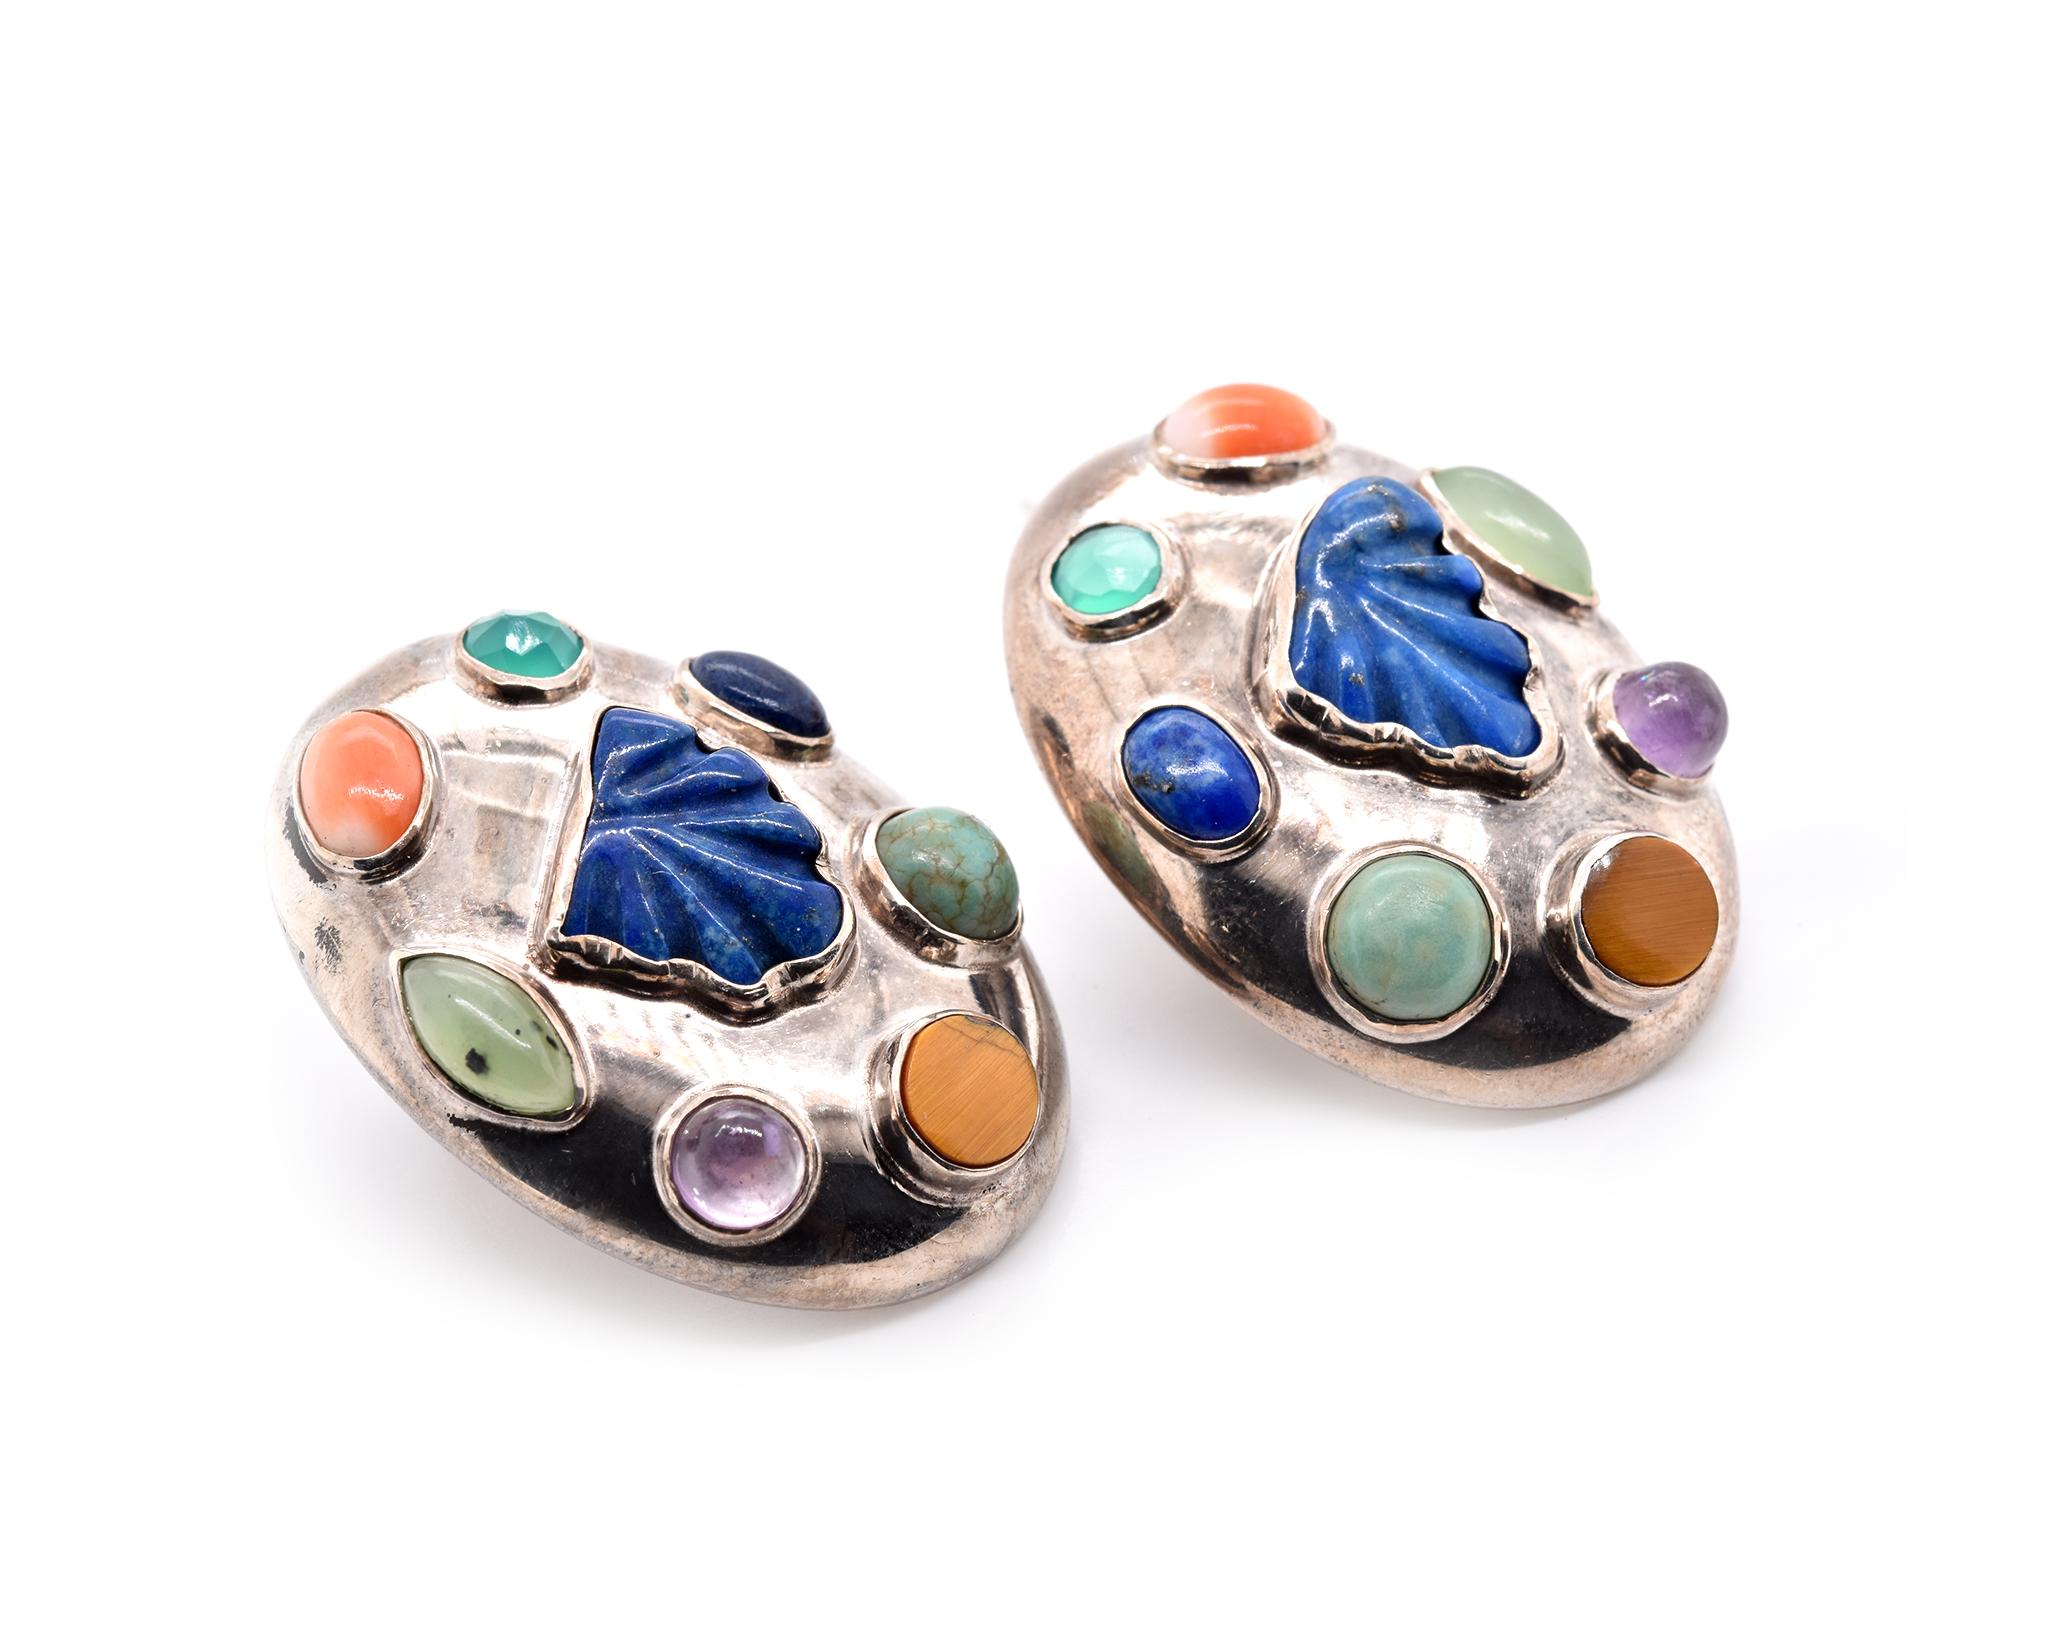 Designer: Celia Harms
Material: sterling silver
Gemstones: lapis lazuli, tiger’s eye, amethyst, jade, coral, green chrysocolla, and turquoise  
Dimensions: earrings measure 34.15mm x 24.55mm
Fastening: clip-on 
Weight: 21.8 grams
